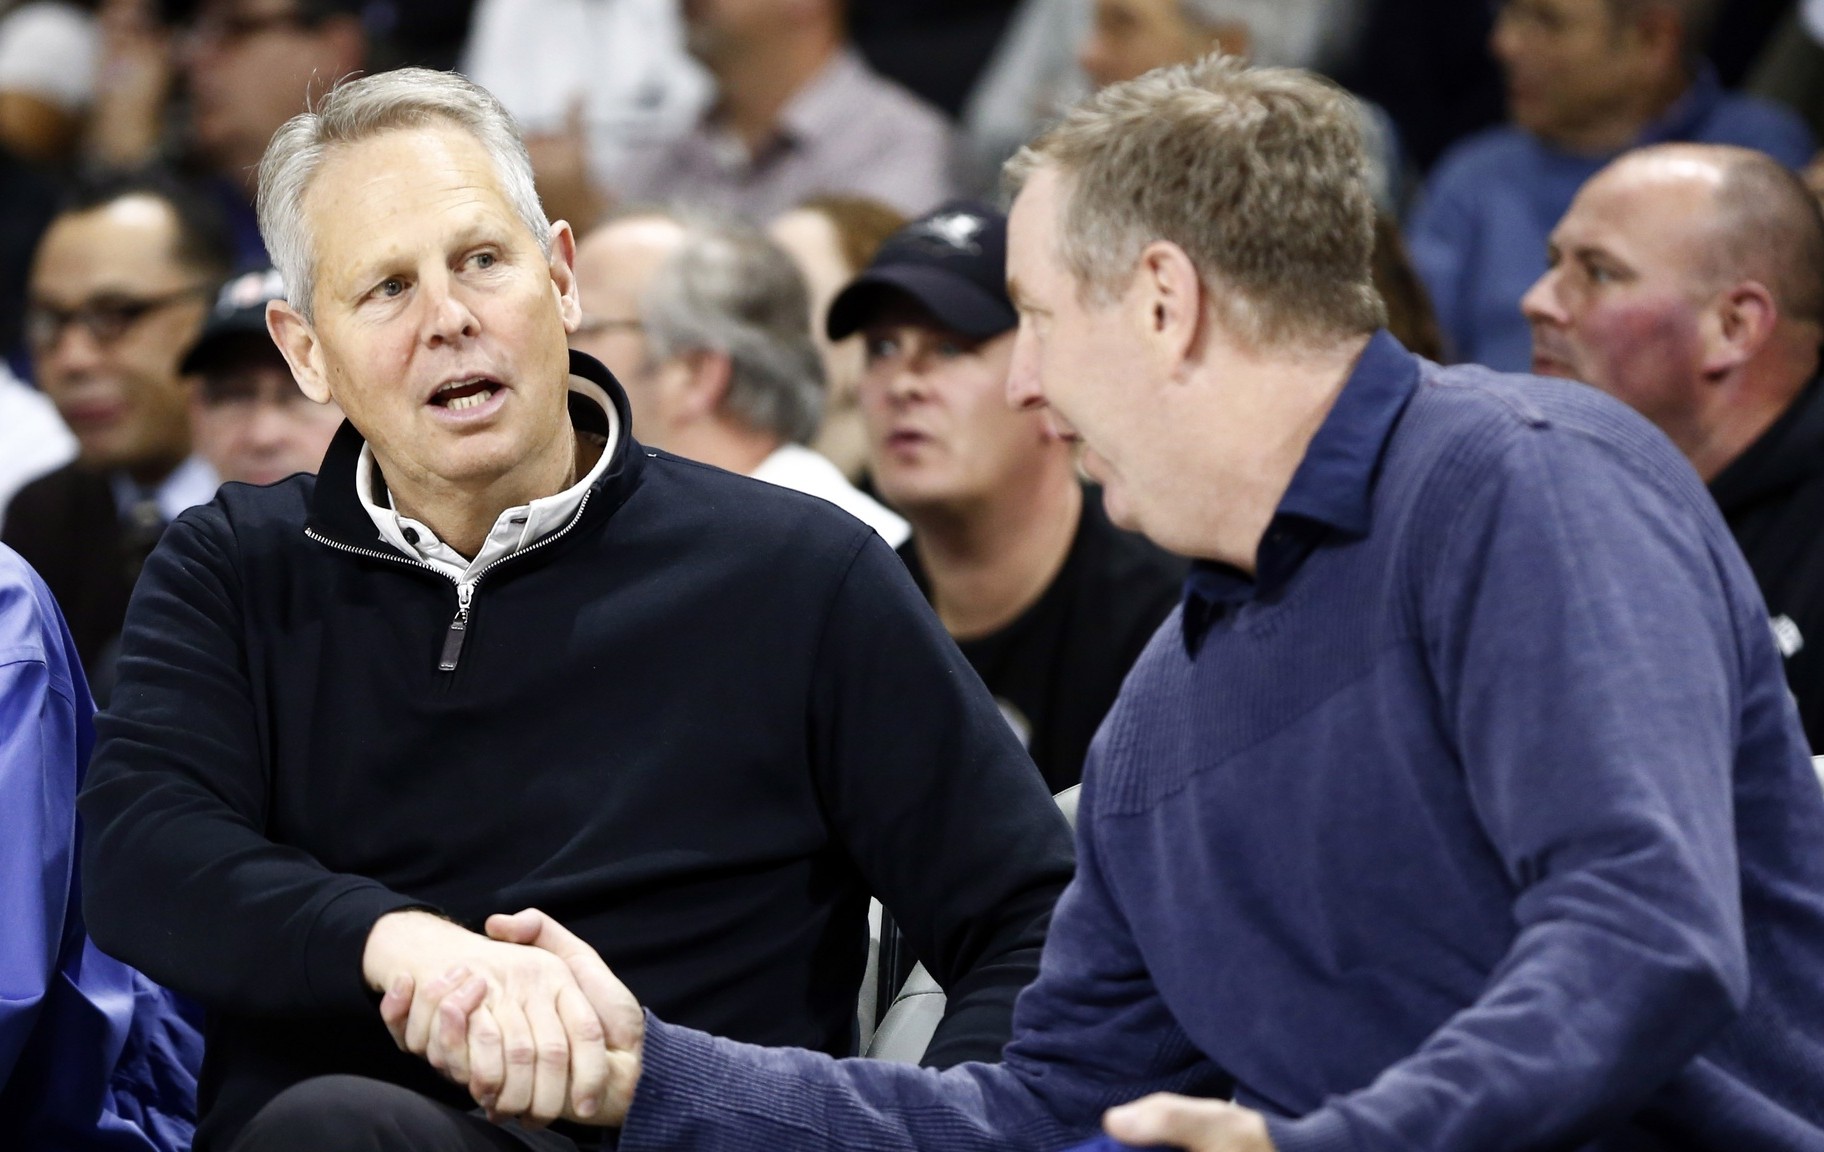 WATCH: Danny Ainge gets pwned by son, Crew Ainge